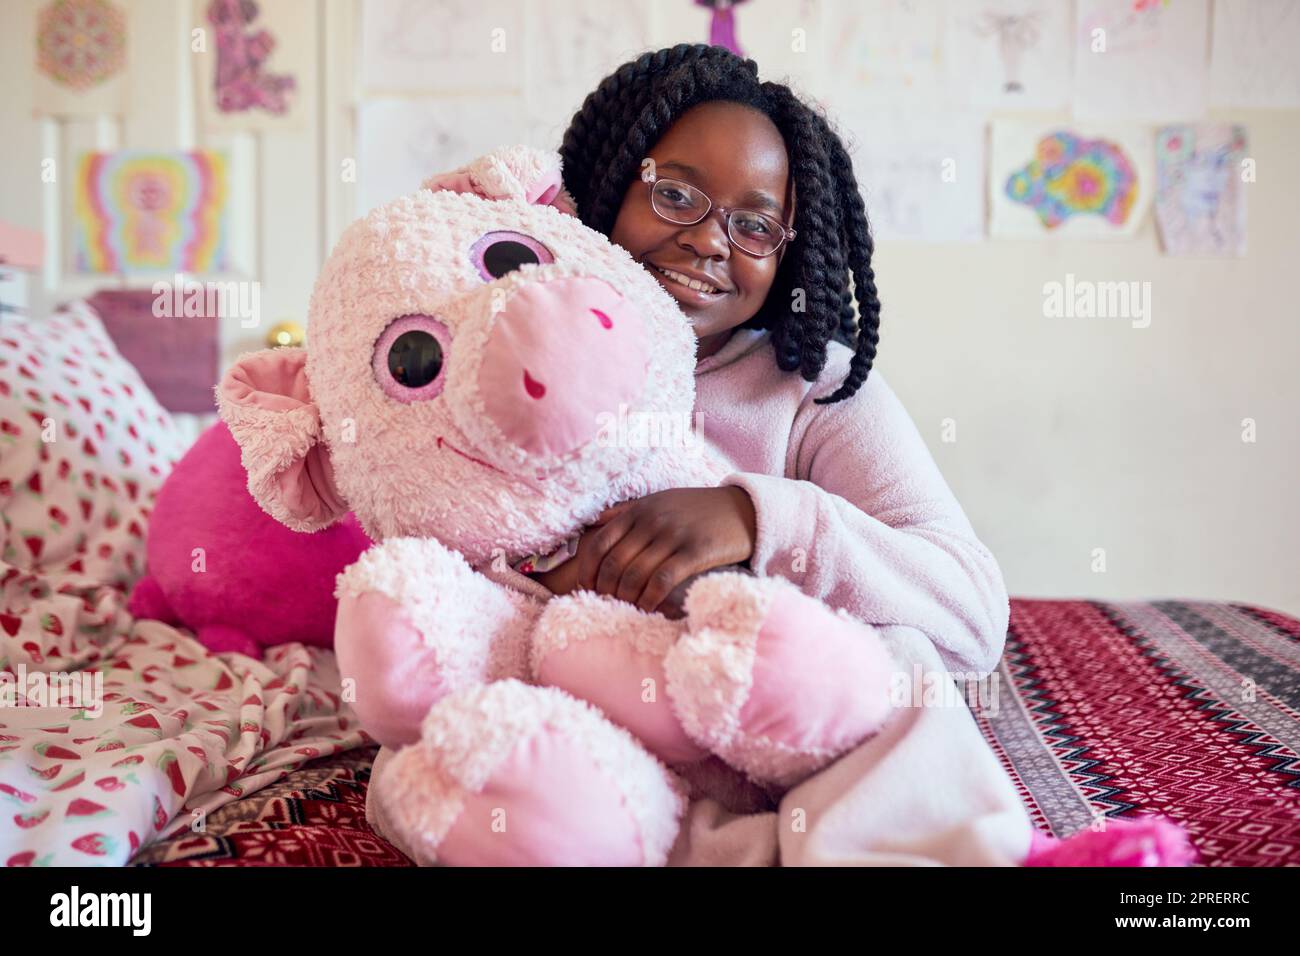 More than just a toy, hes my best friend. Portrait of an adorable little girl holding a plush toy while sitting on her bed in her bedroom. Stock Photo